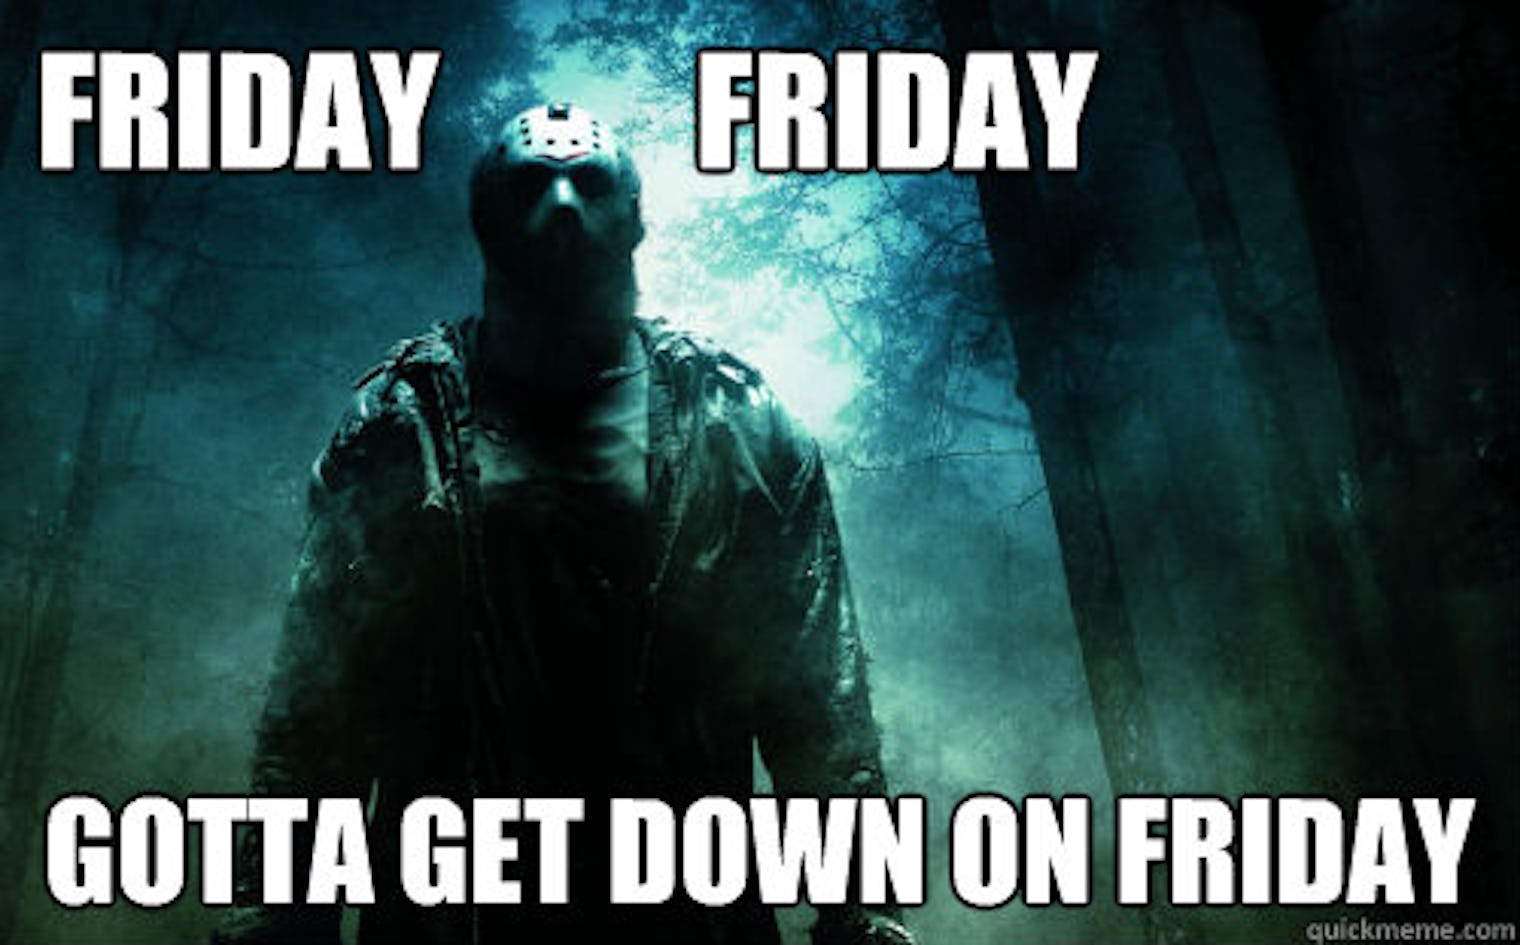 7 Friday The 13th Memes To Make You Laugh On This Creepy Day